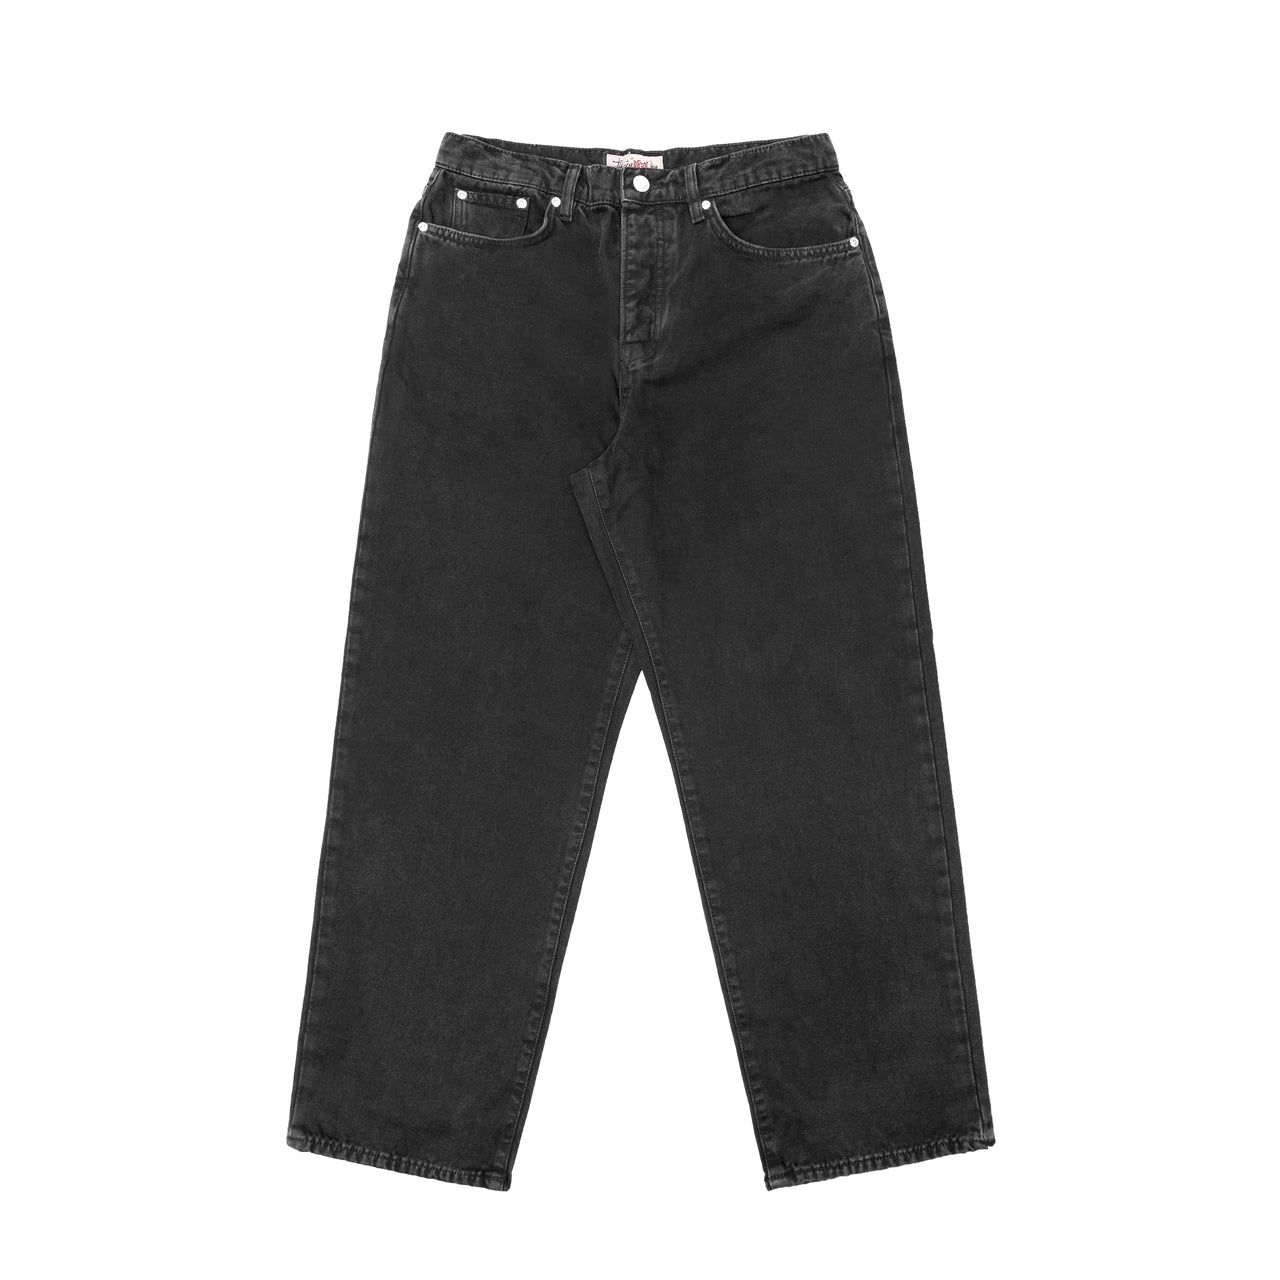 WASHED CANVAS BIG OL' JEANS – Saint Alfred